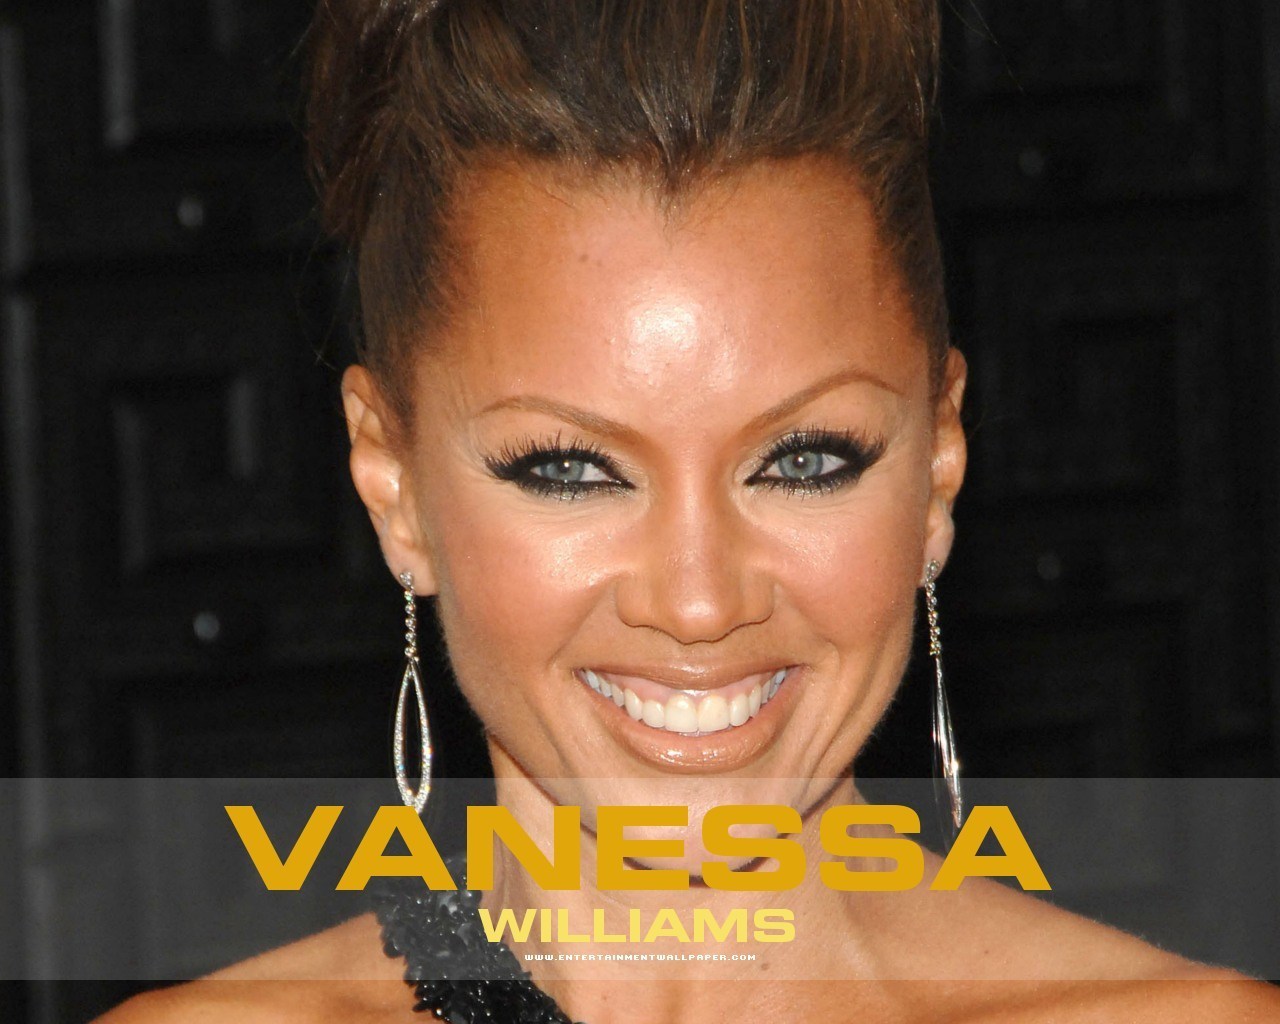 Vanessa Williams Image HD Wallpaper And Background Photos